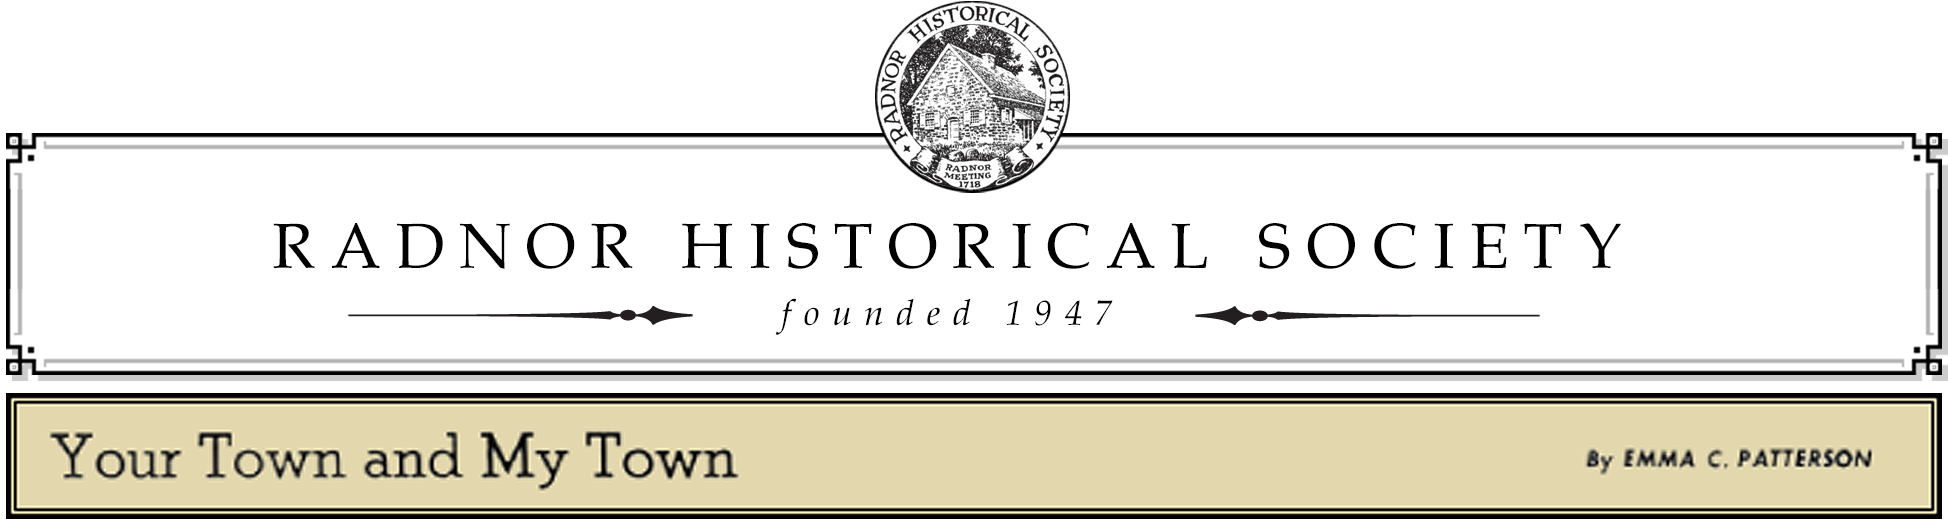 Radnor Historical Society | Your Town and My Town